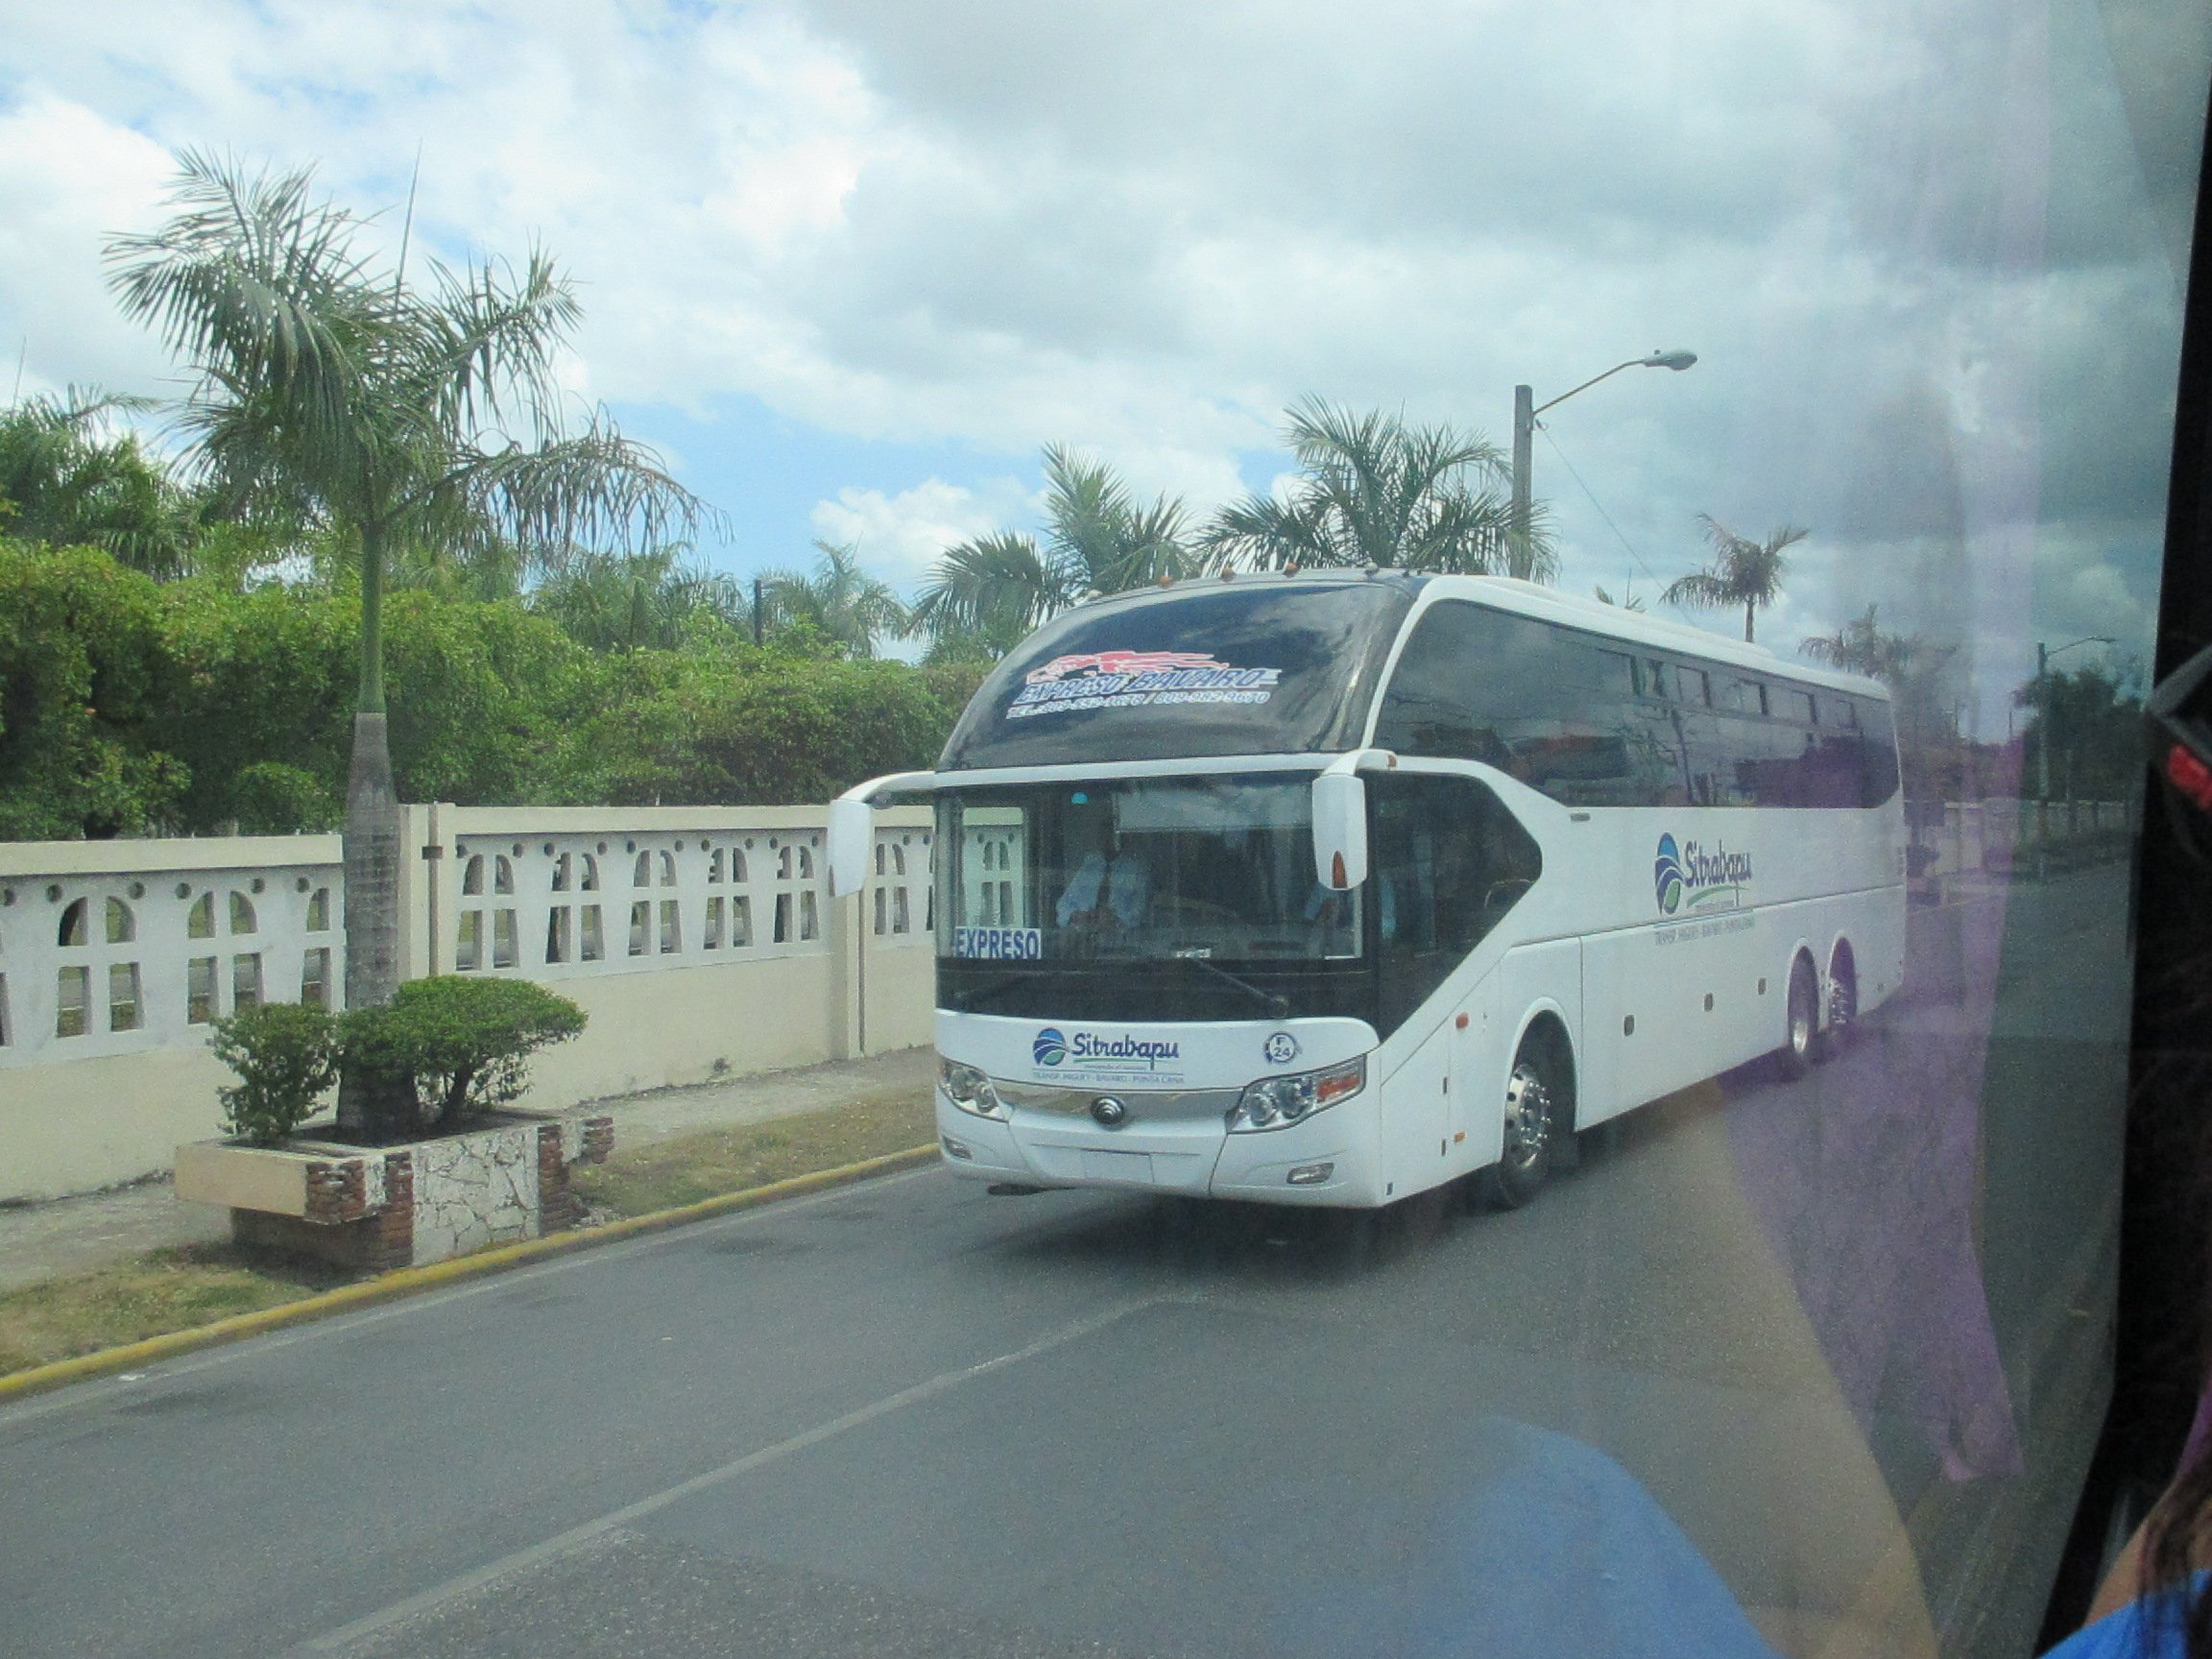 punta cana to santo domingo, BUSES FROM PUNTA CANA AIRPORT TO BAVARO BEACH. LOCAL BUSES DOMINICAN REPUBLIC, TRAMABAPU or SITRABAPU, How To Get From Punta Cana Airport To Santo Domingo - All Possible Ways